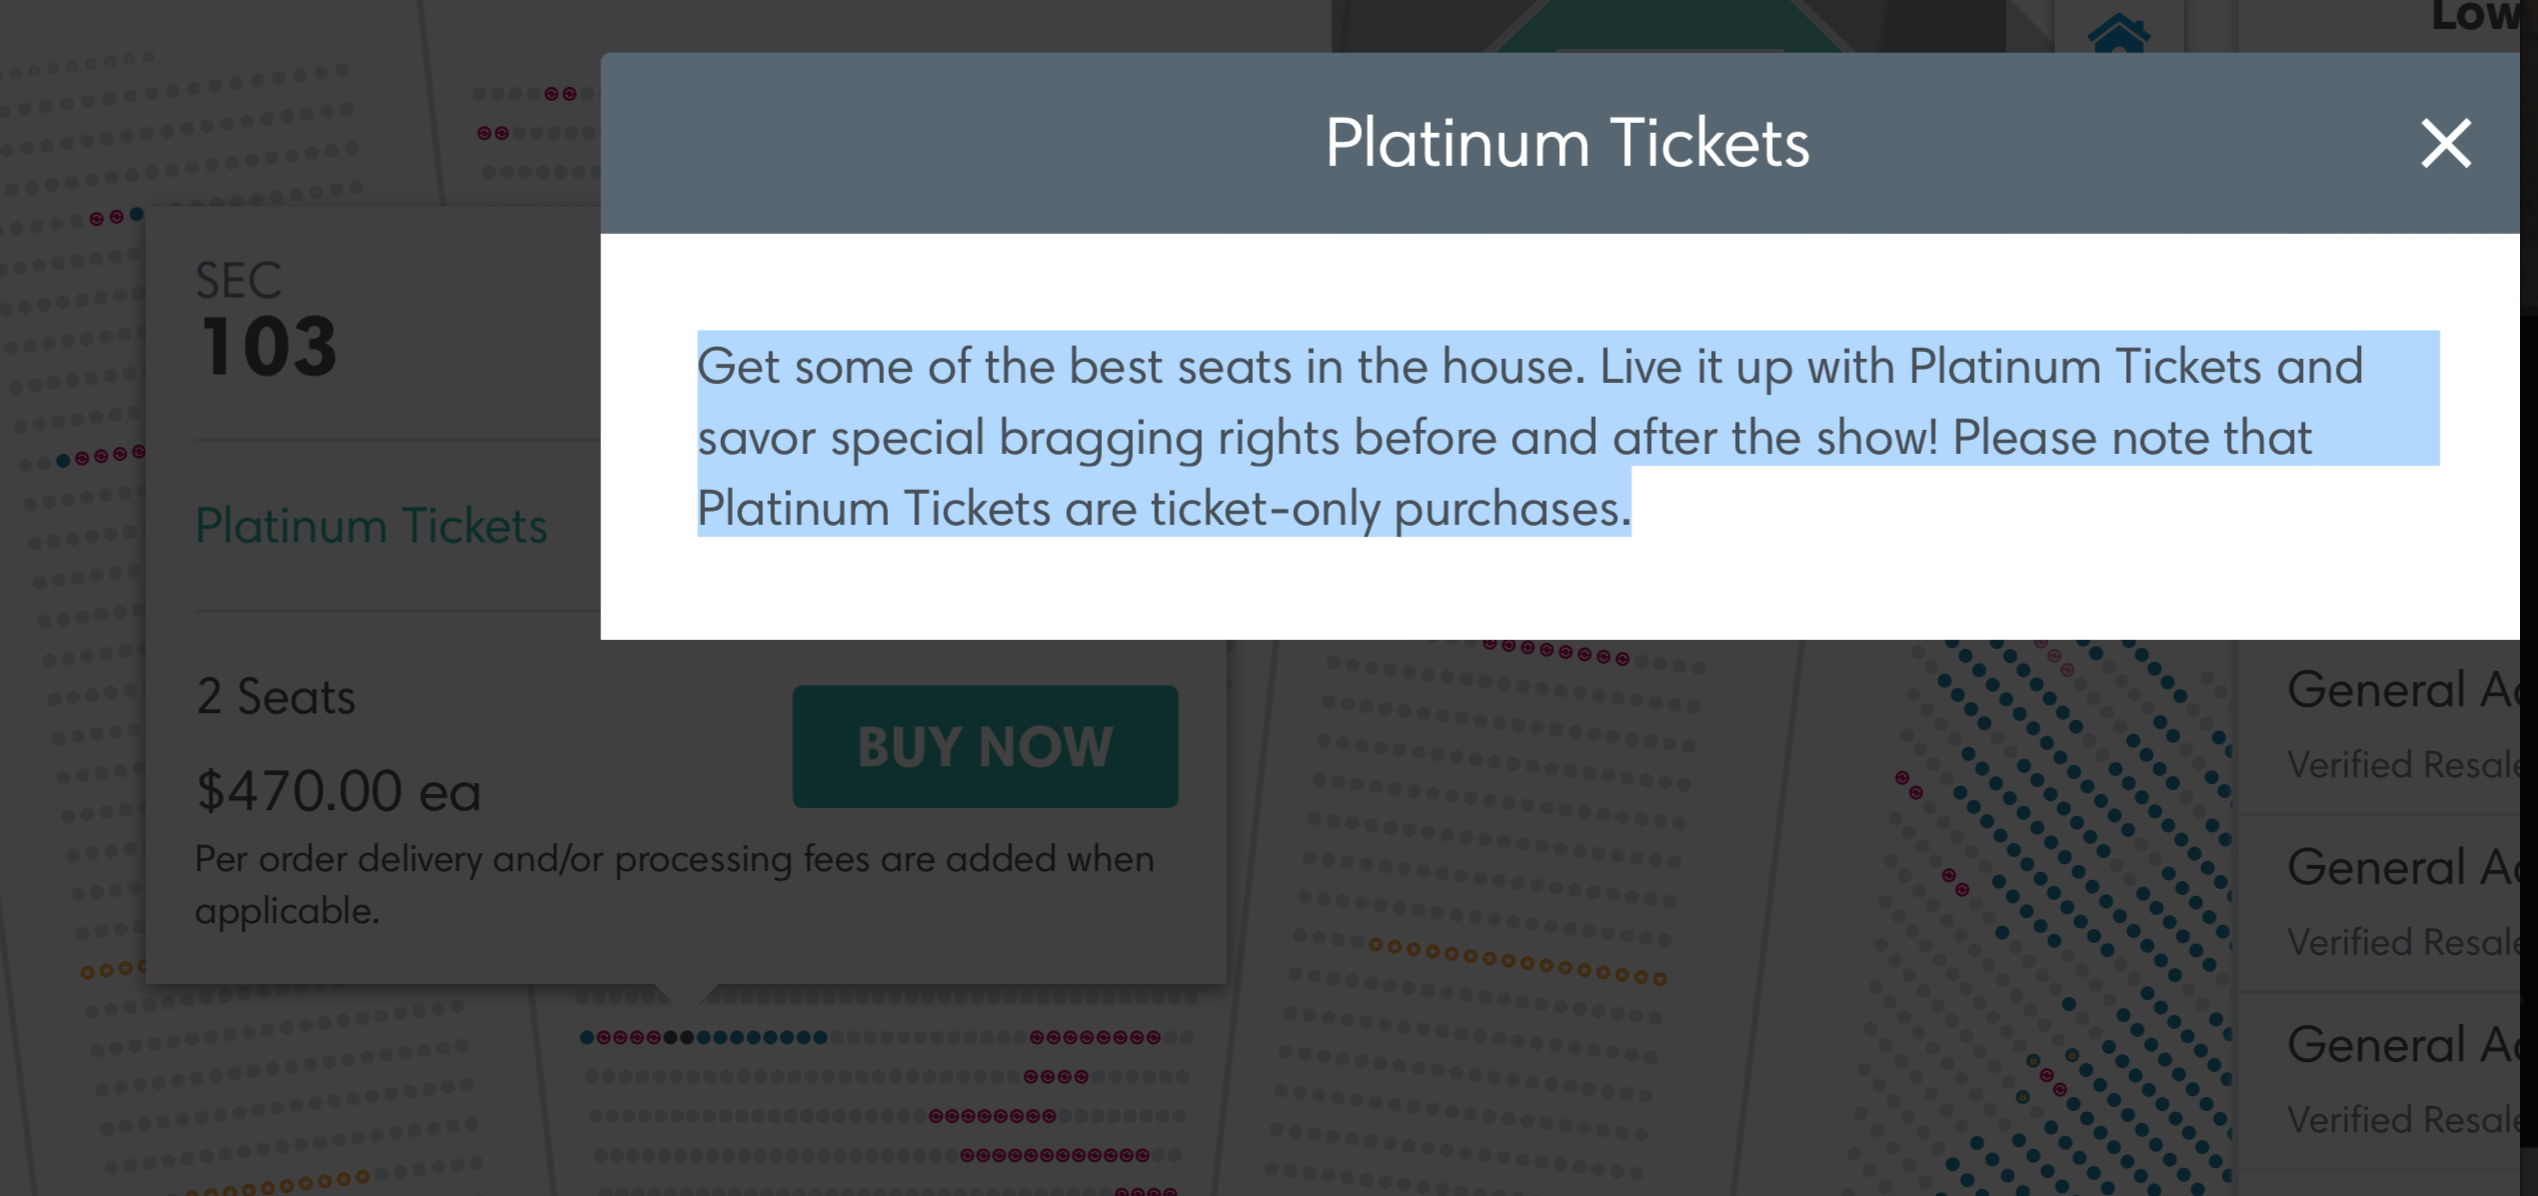 What ticketmaster tells you a Platinum Ticket is when you go to purchase